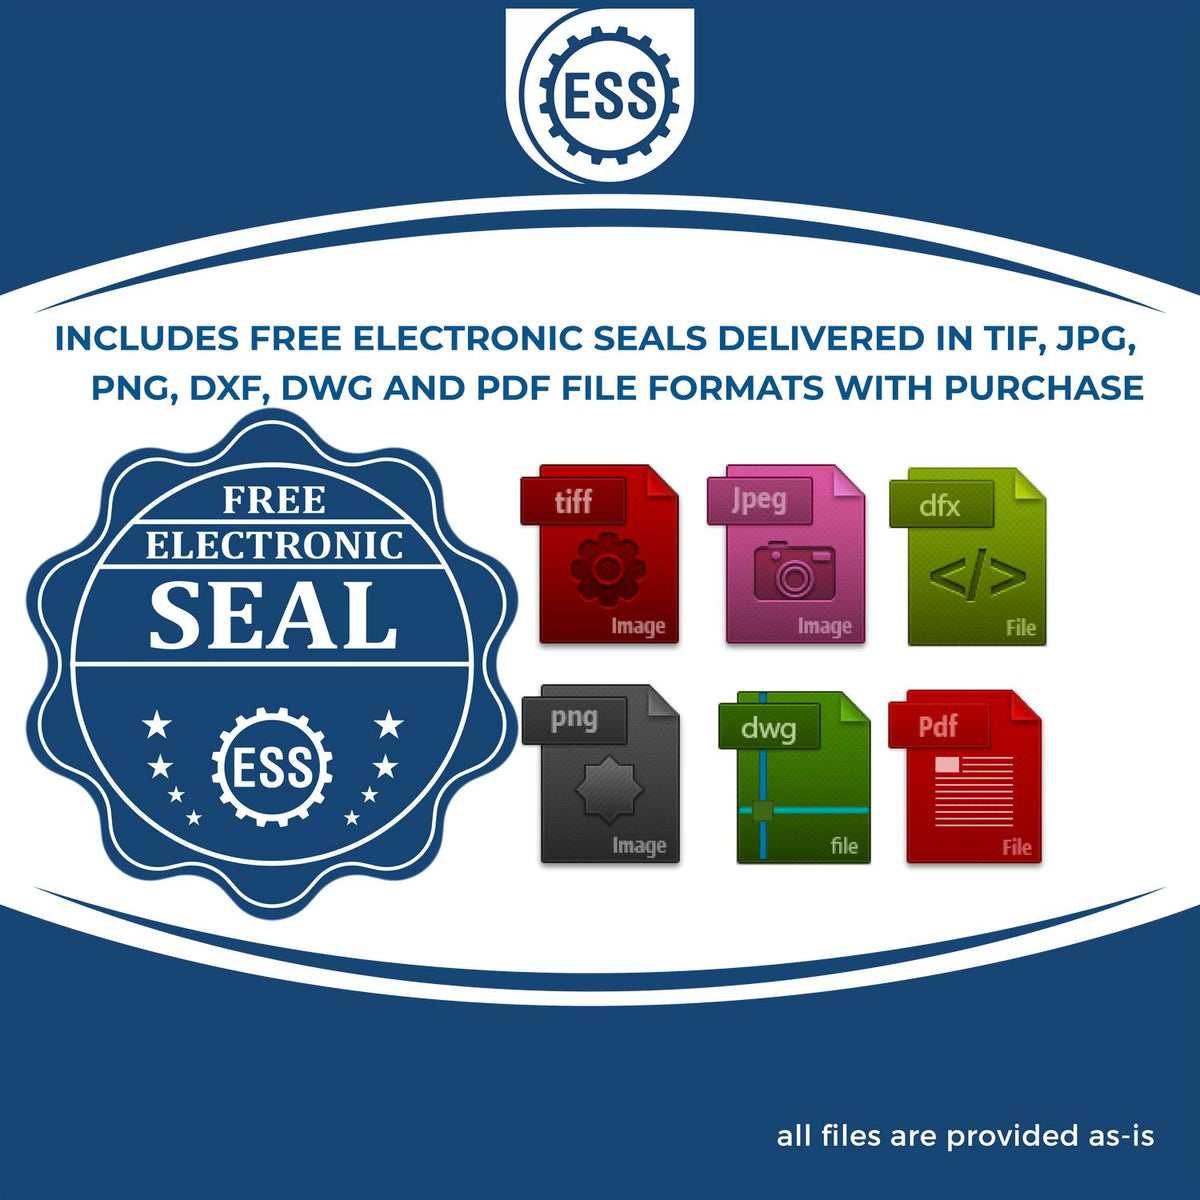 An infographic for the free electronic seal for the State of Oklahoma Long Reach Architectural Embossing Seal illustrating the different file type icons such as DXF, DWG, TIF, JPG and PNG.